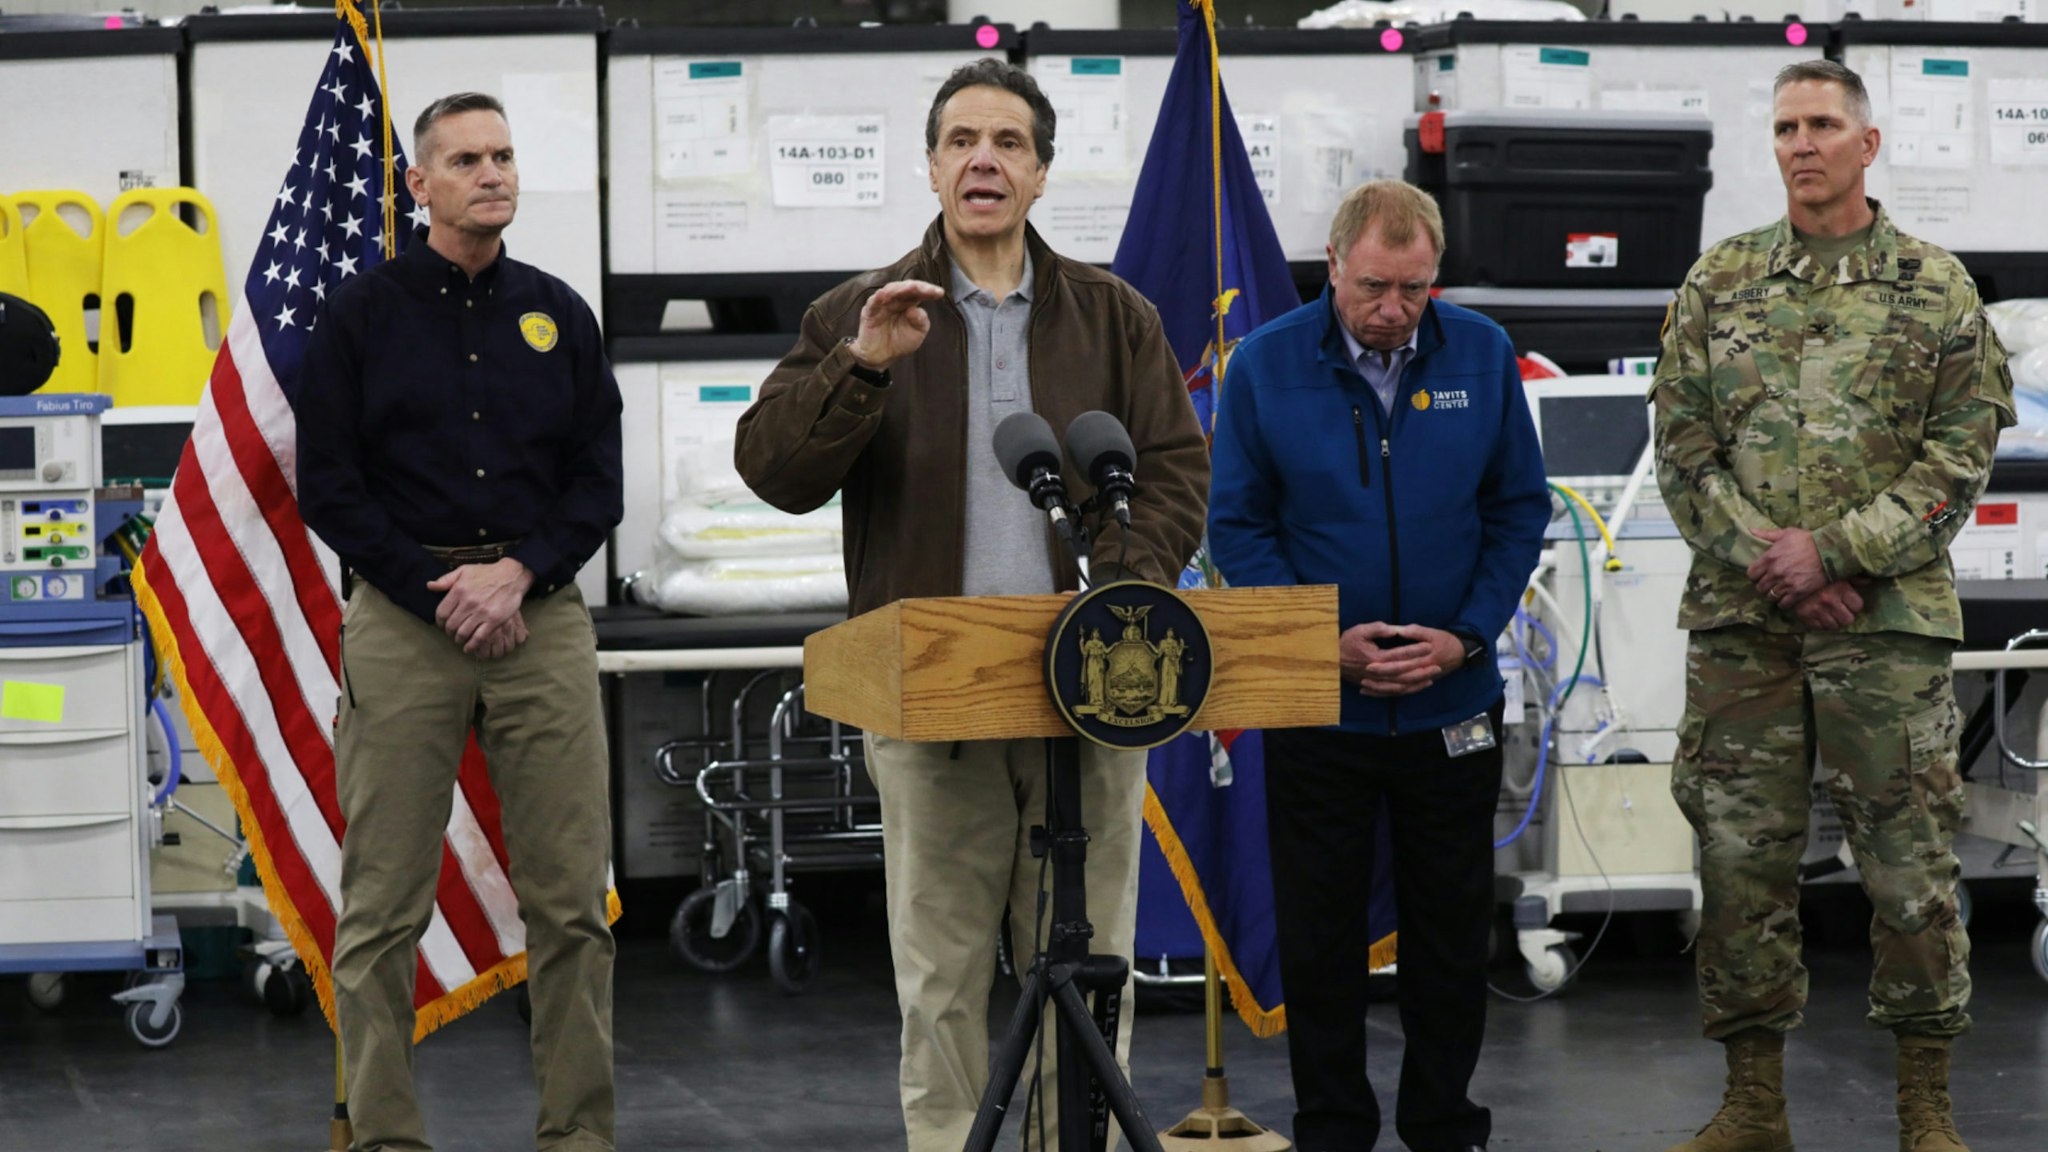 New York Governor Andrew Cuomo speaks to the media and members of the National Guard at the Javits Convention Center which is being turned into a hospital to help fight coronavirus cases on March 23, 2020 in New York City.